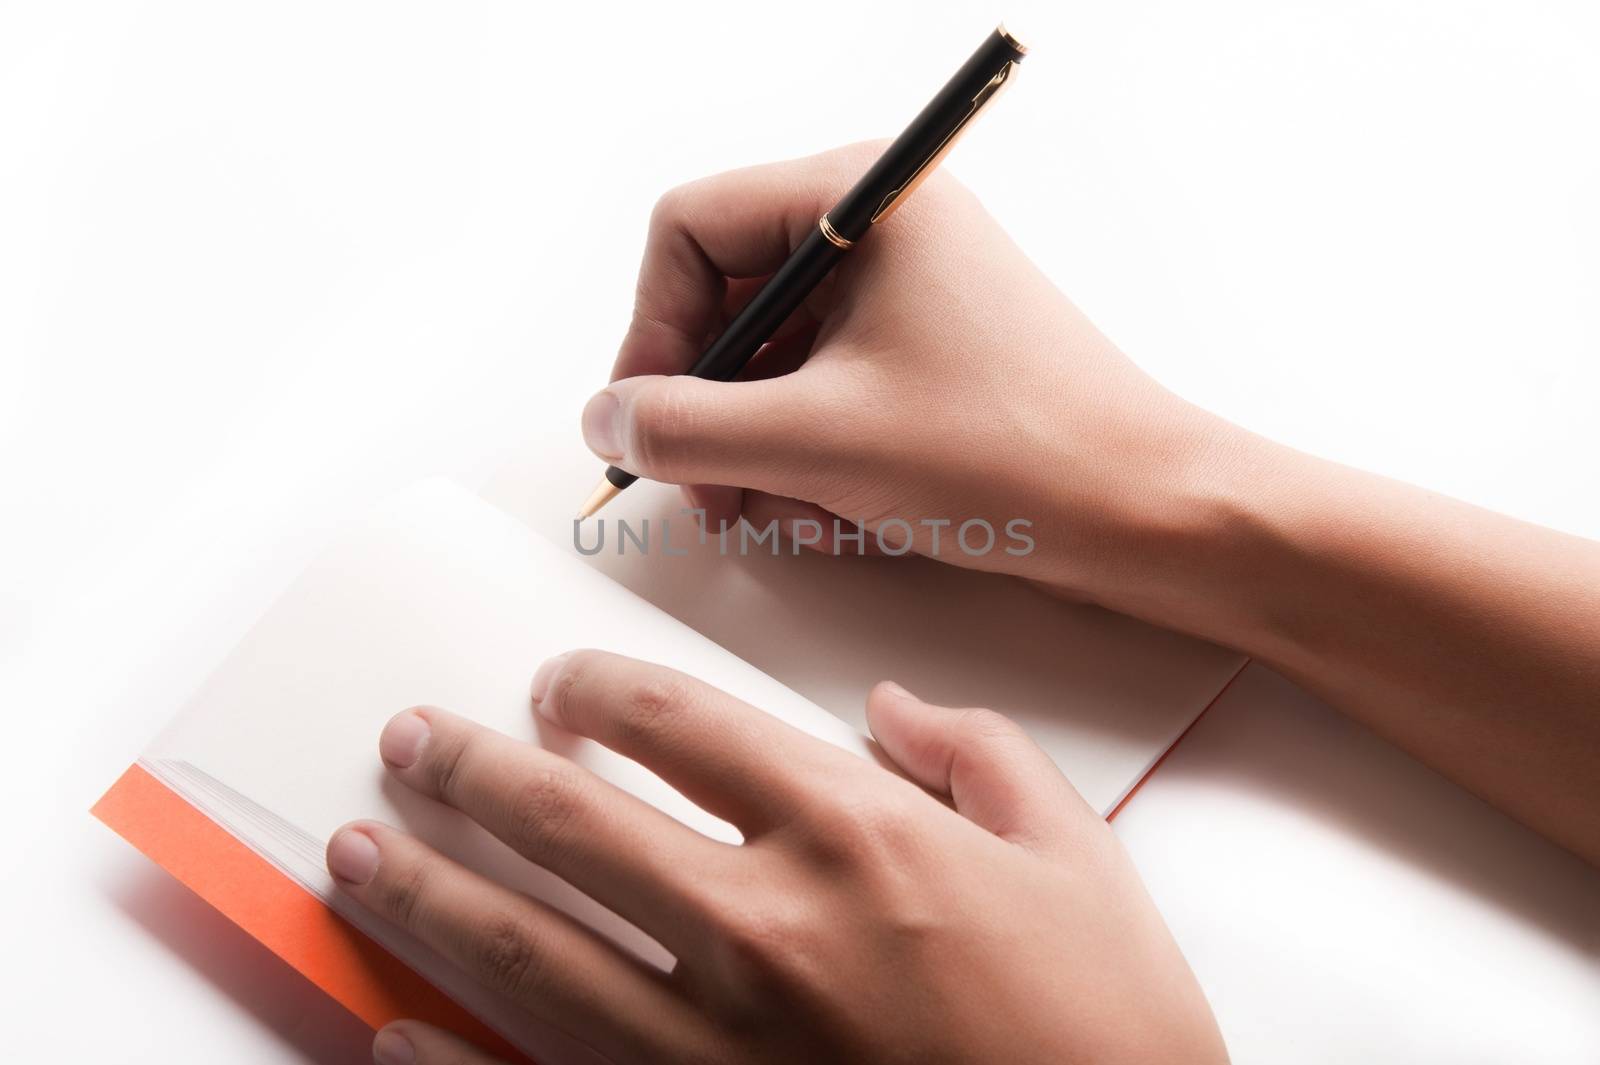 Horizontal close-up of isolated on a white background woman's note-taking hands